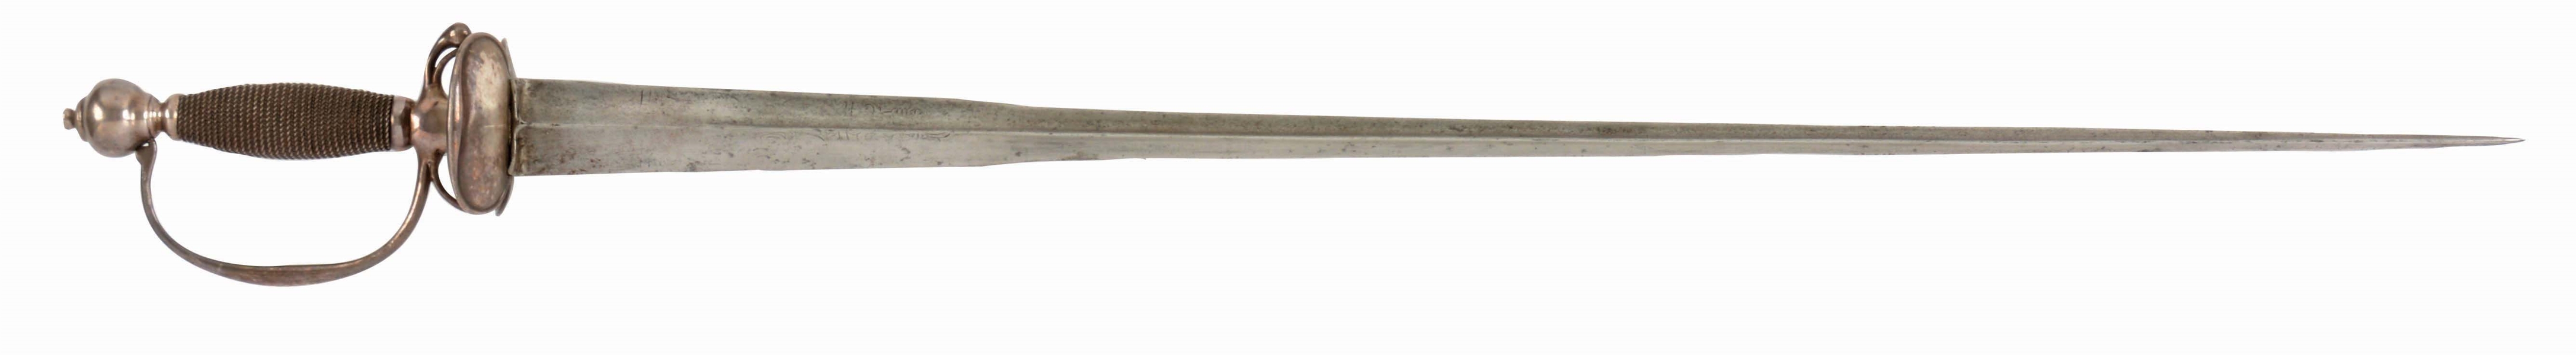 ENGLISH SILVER-HILTED SMALL SWORD.